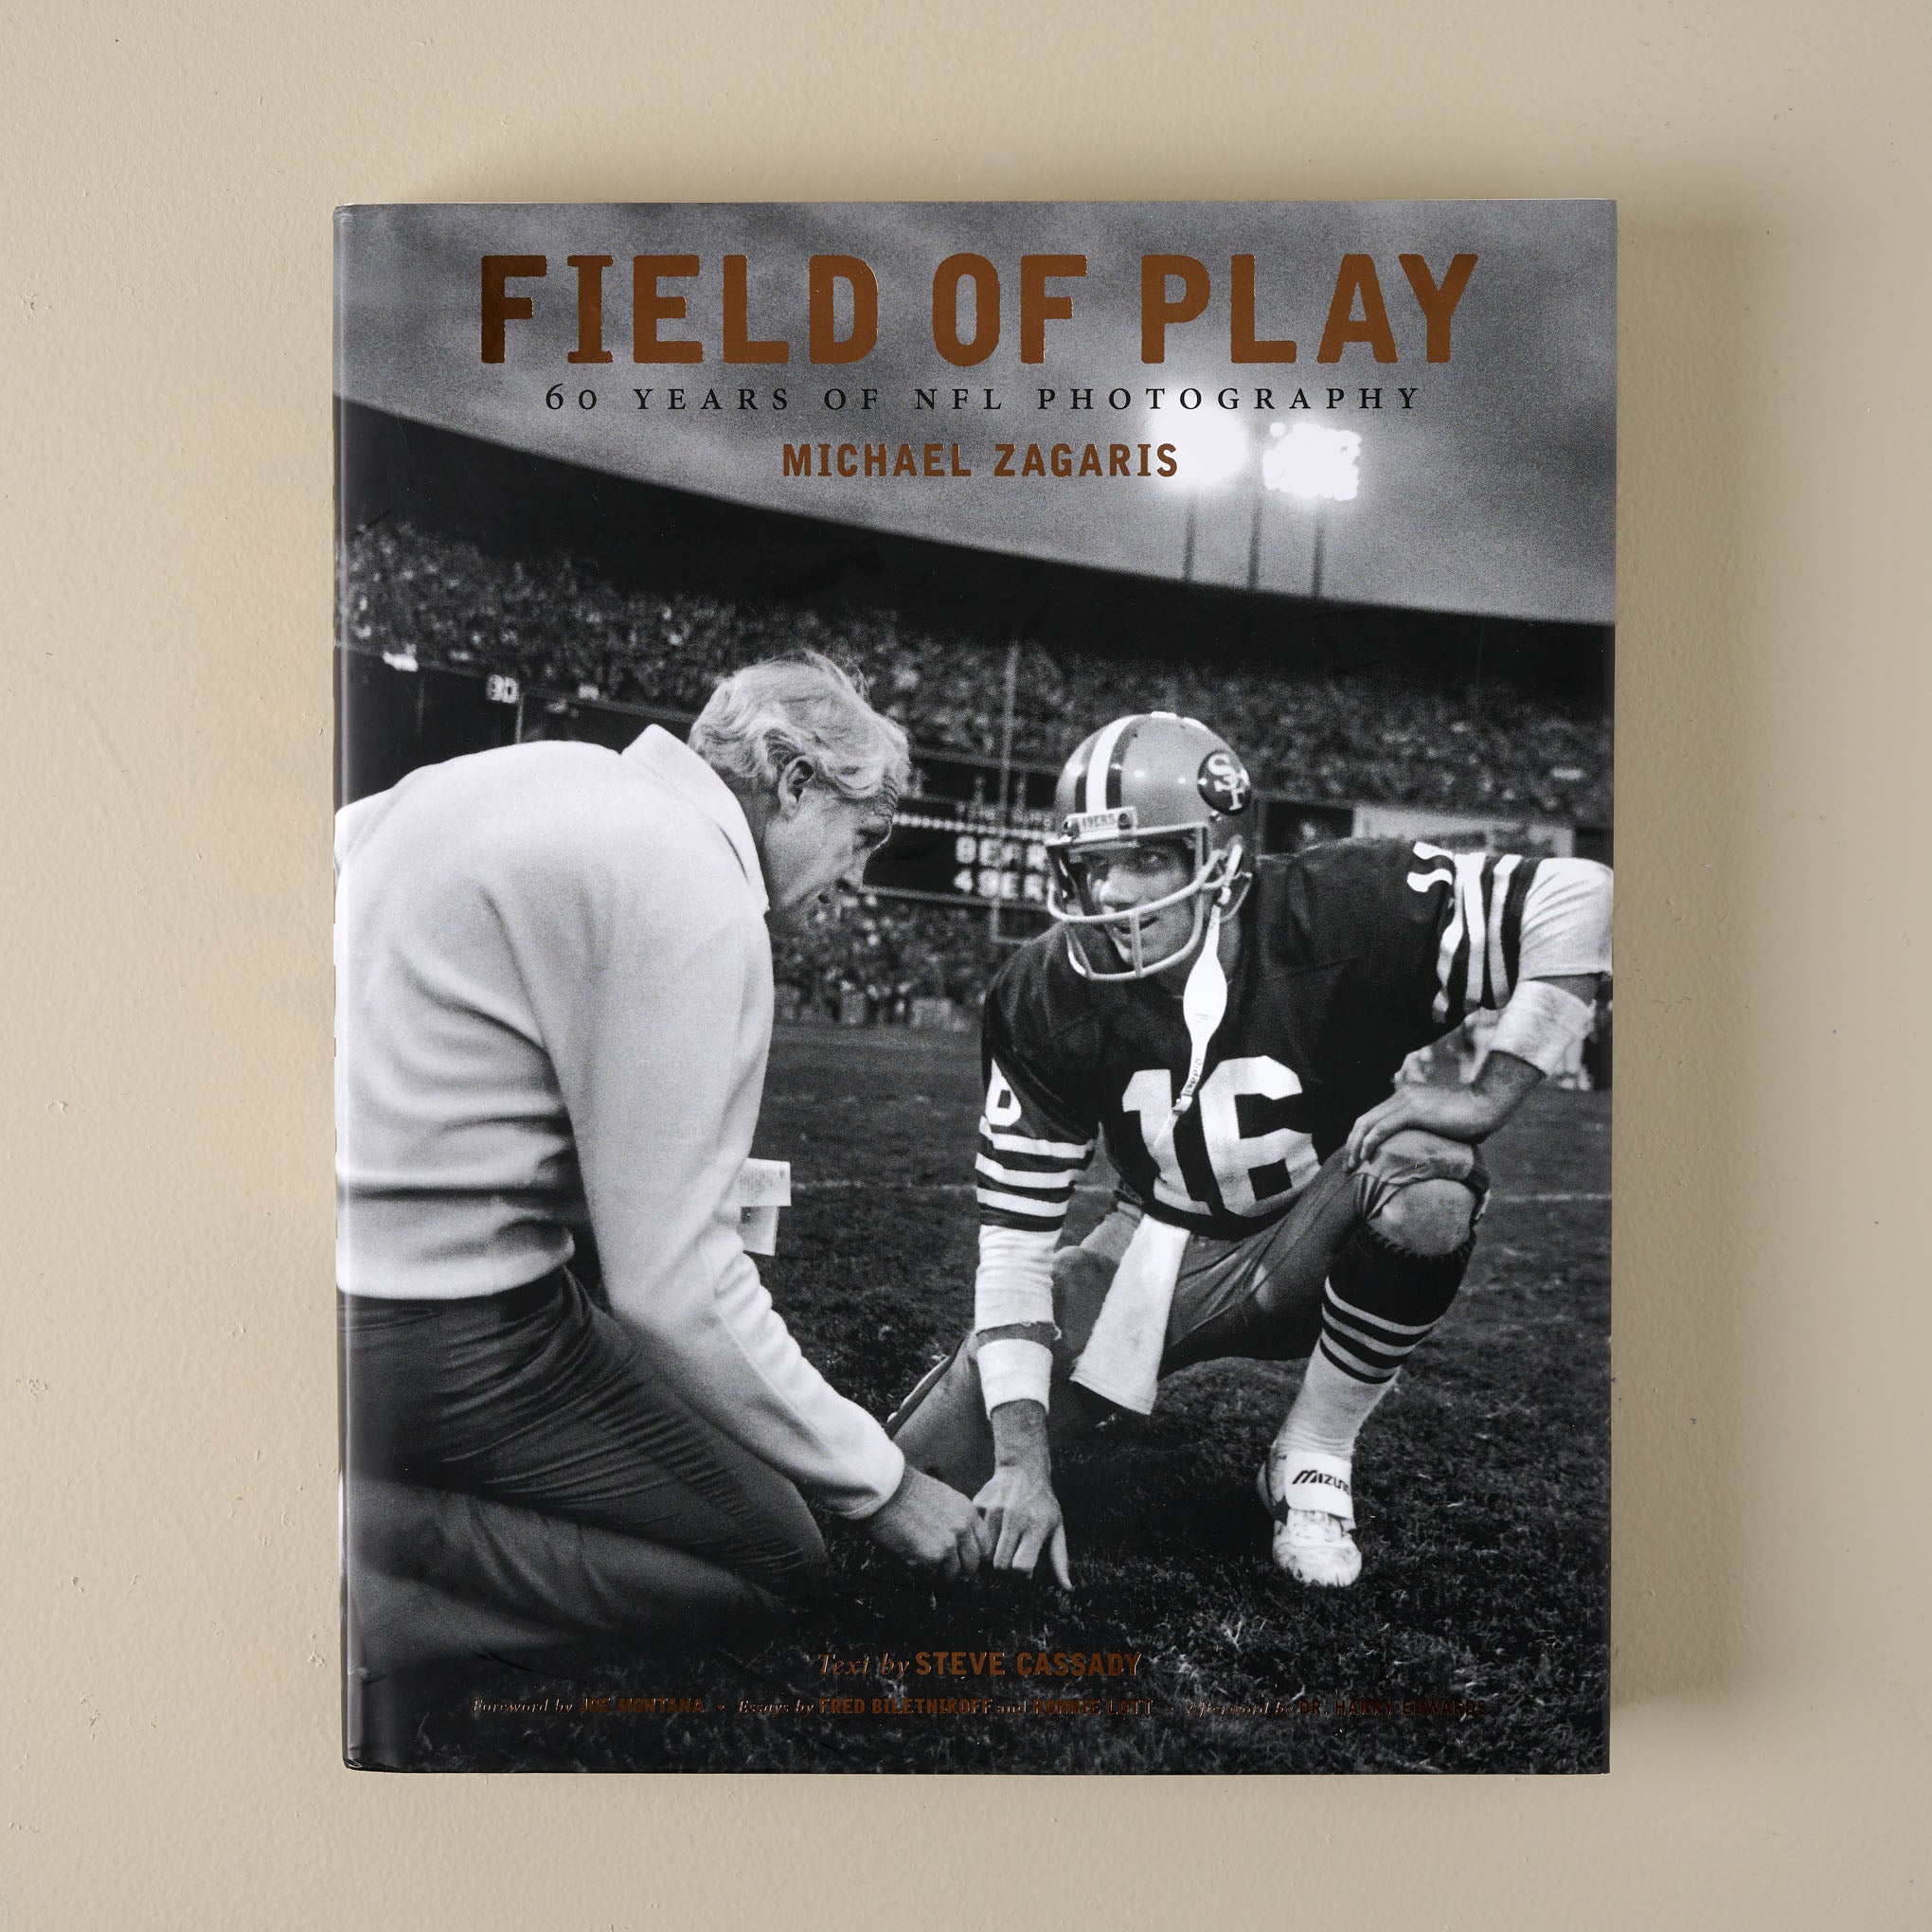 Field of Play: 60 Years of NFL Photography $80.00